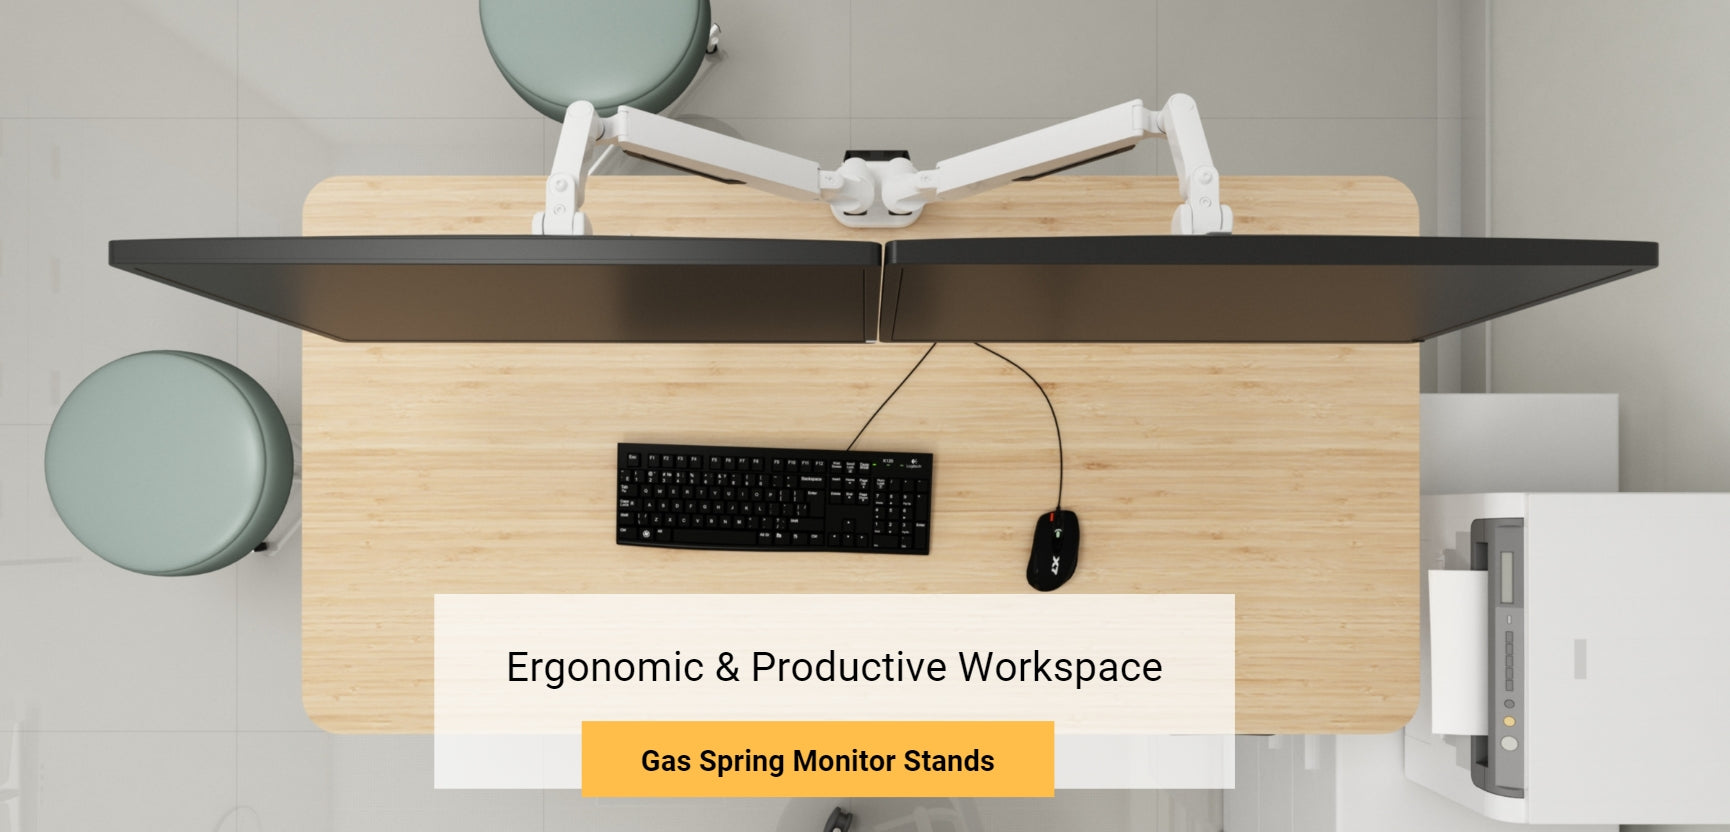  Gas Spring Monitor Stands